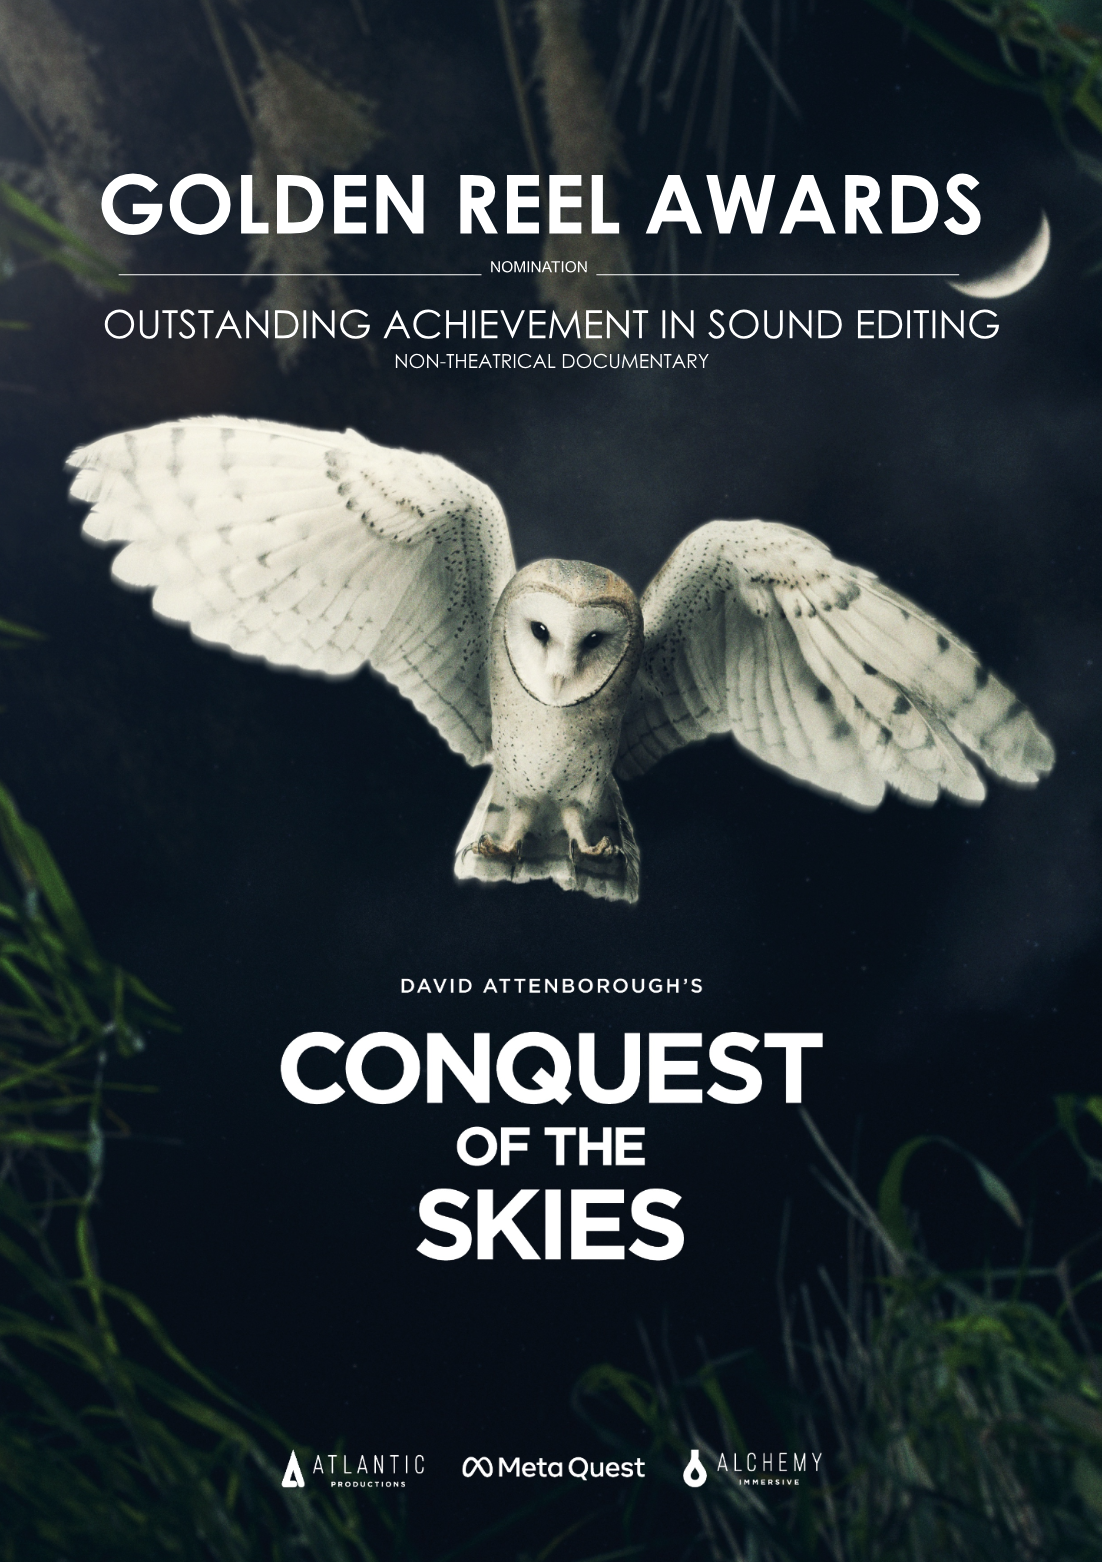 David Attenborough’s Conquest of the Skies VR series nominated for the Motion Picture Sound Editors 71st Annual Golden Reel Award for Outstanding Achievement in Sound Editing